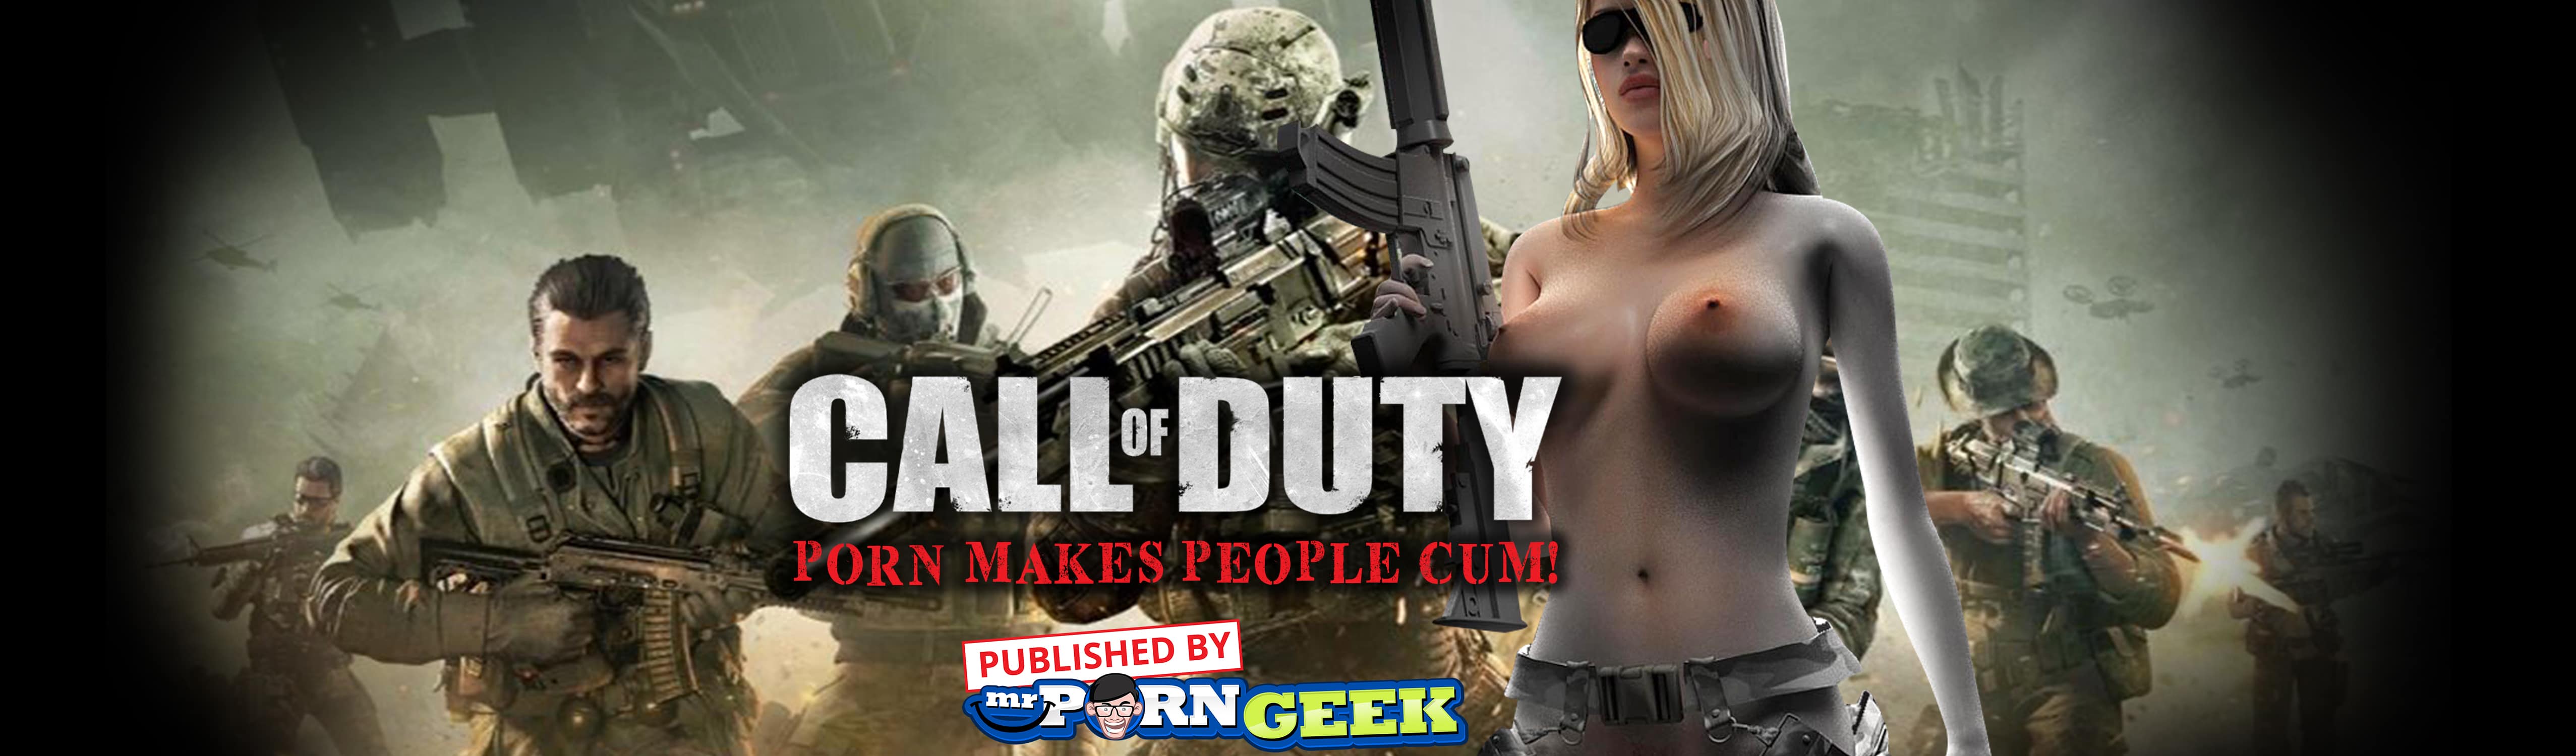 Call of duty game porn